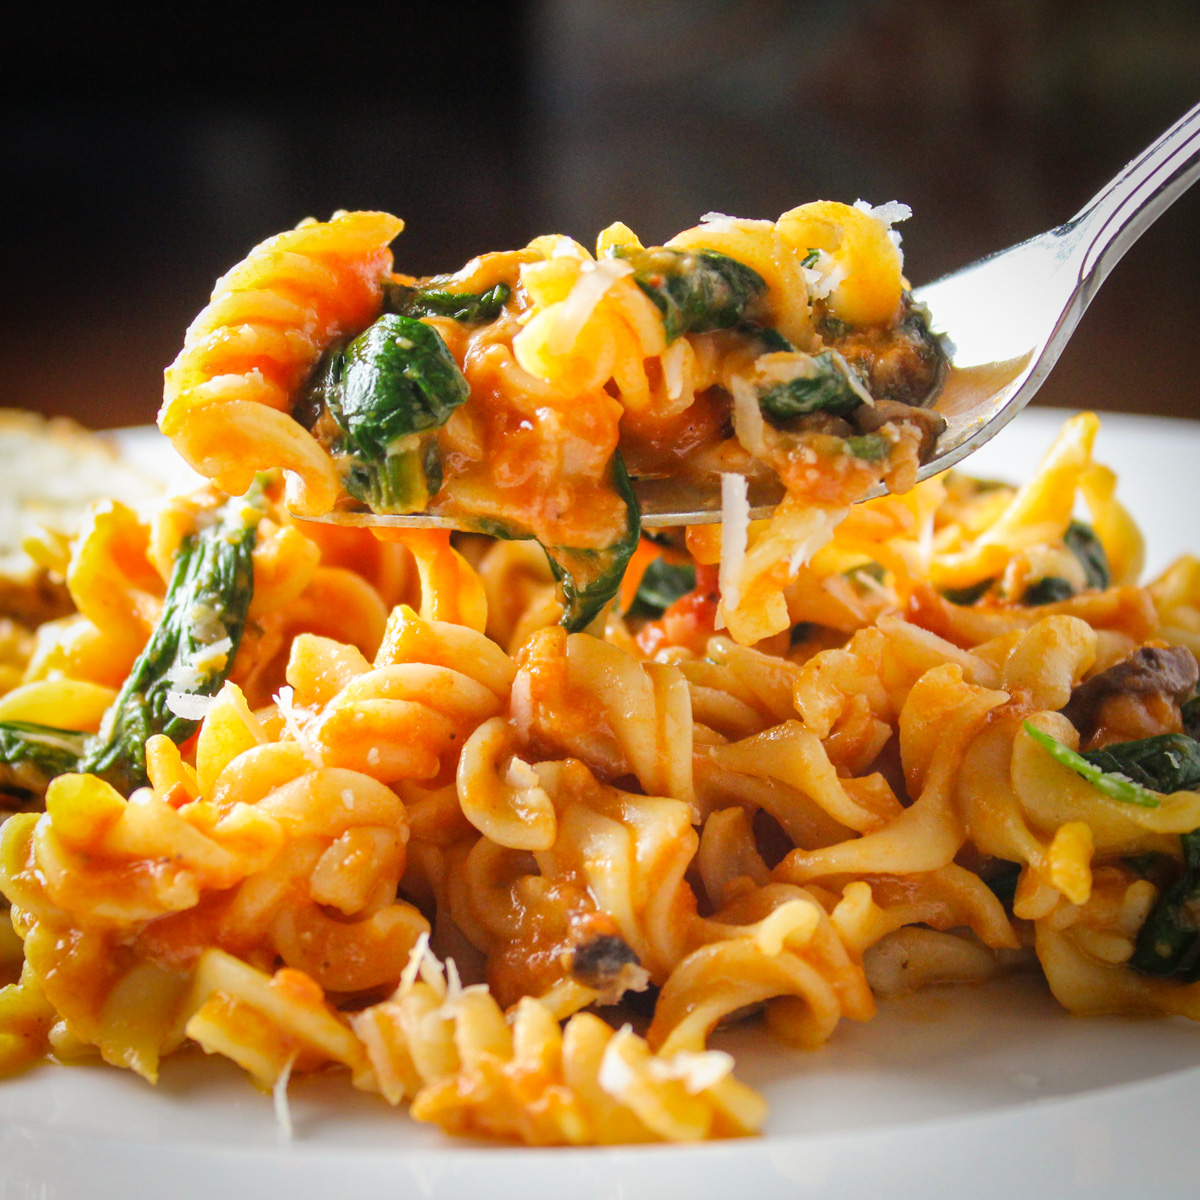 plate of pasta with spinach tomato and cheese